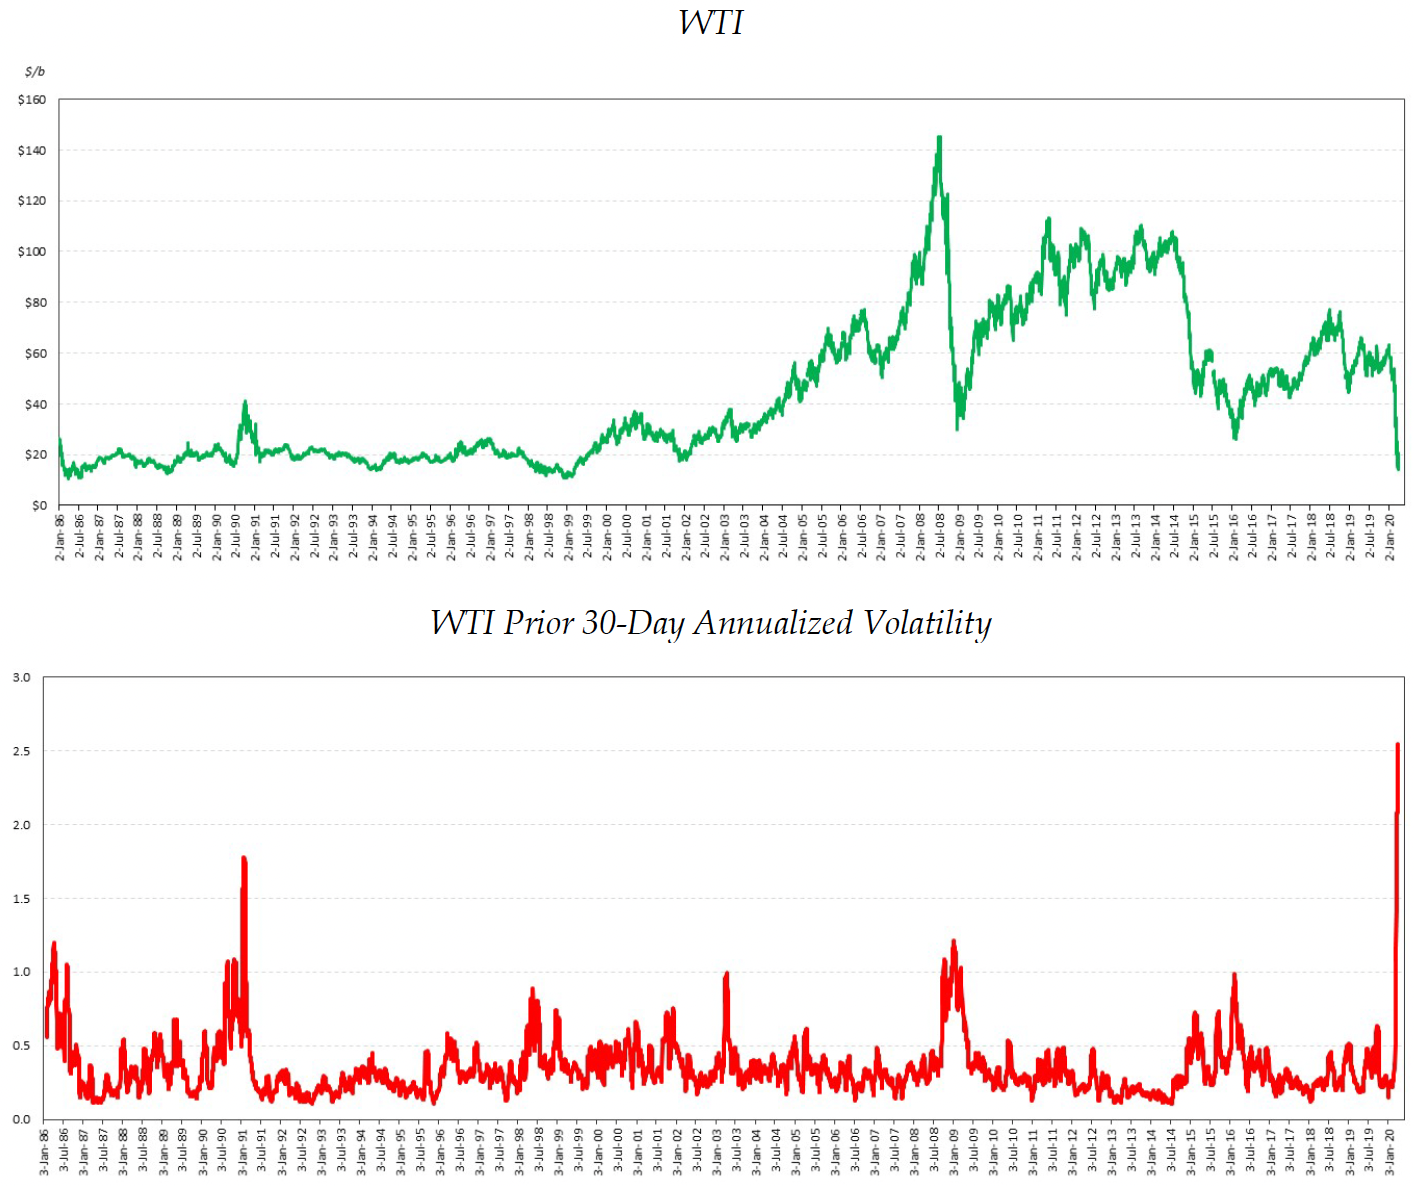 These graphs compares oil prices and annualized oil price volatility over time.